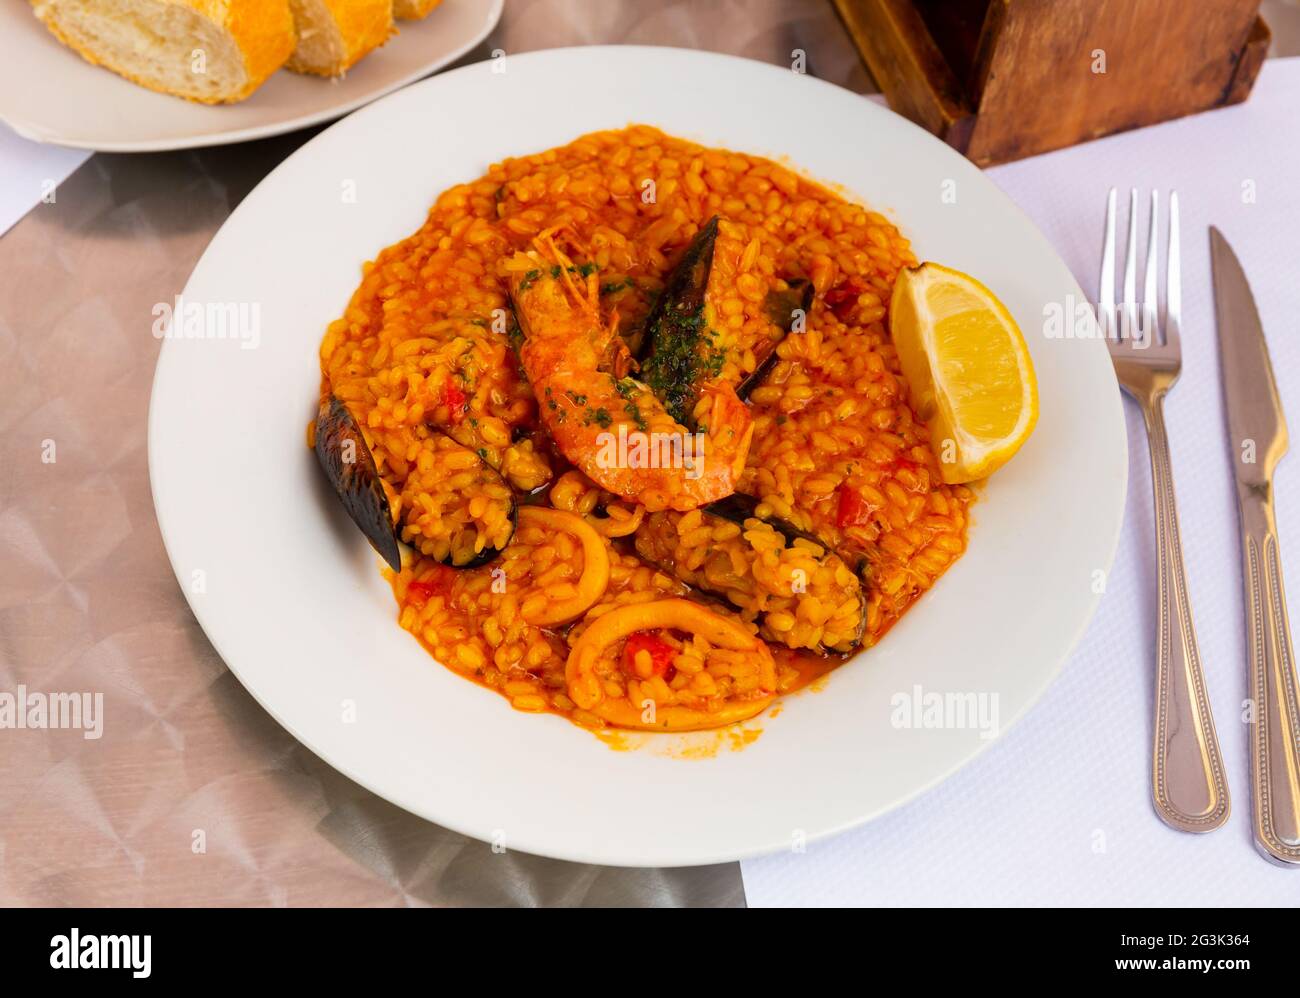 Seafood paella with mussels, calamari rings and prawns Stock Photo